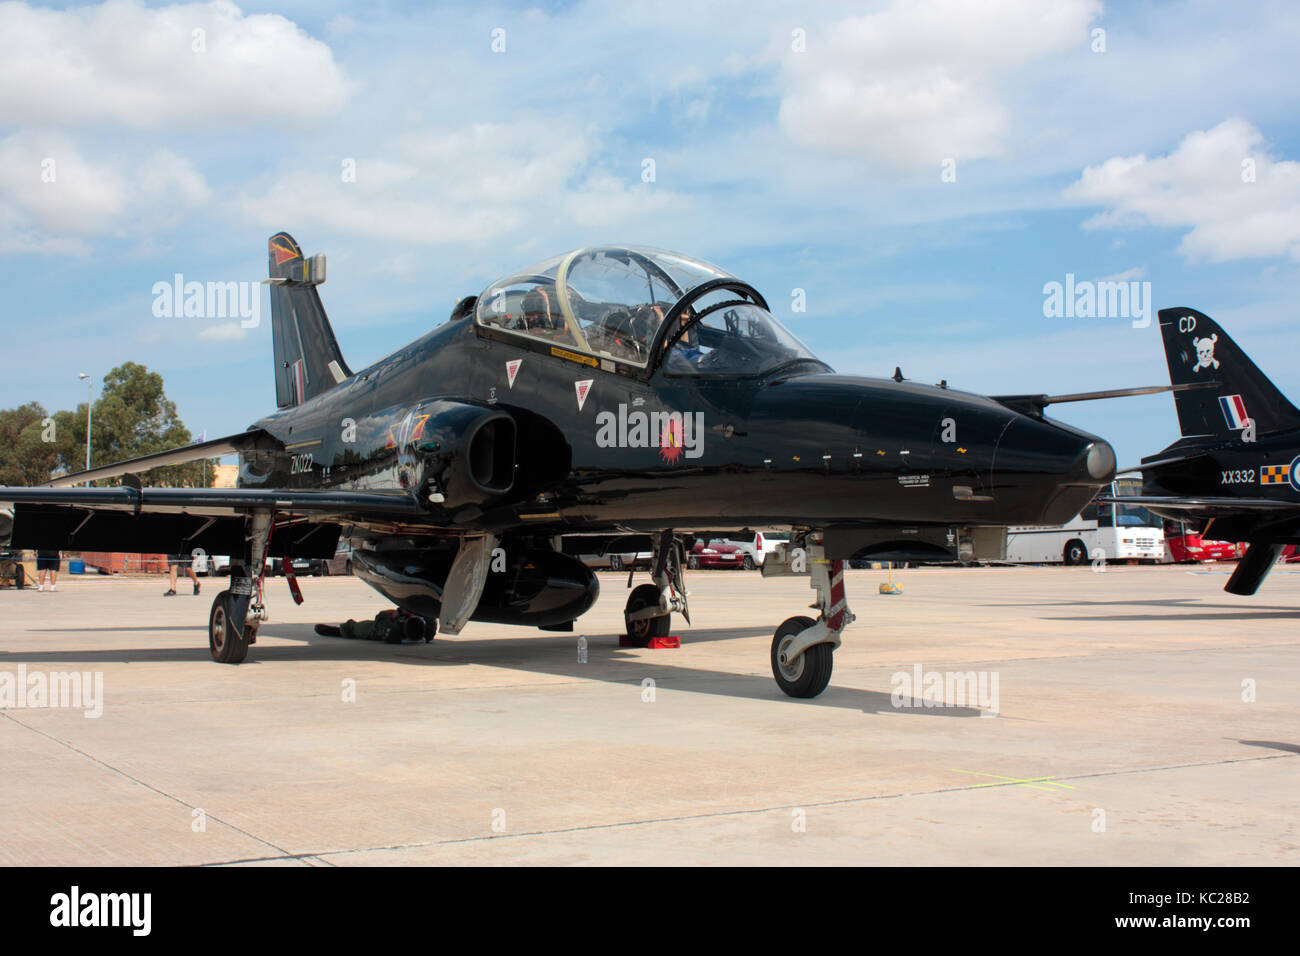 BAE Systems Hawk T2 military jet trainer of the Royal Air Force Stock Photo